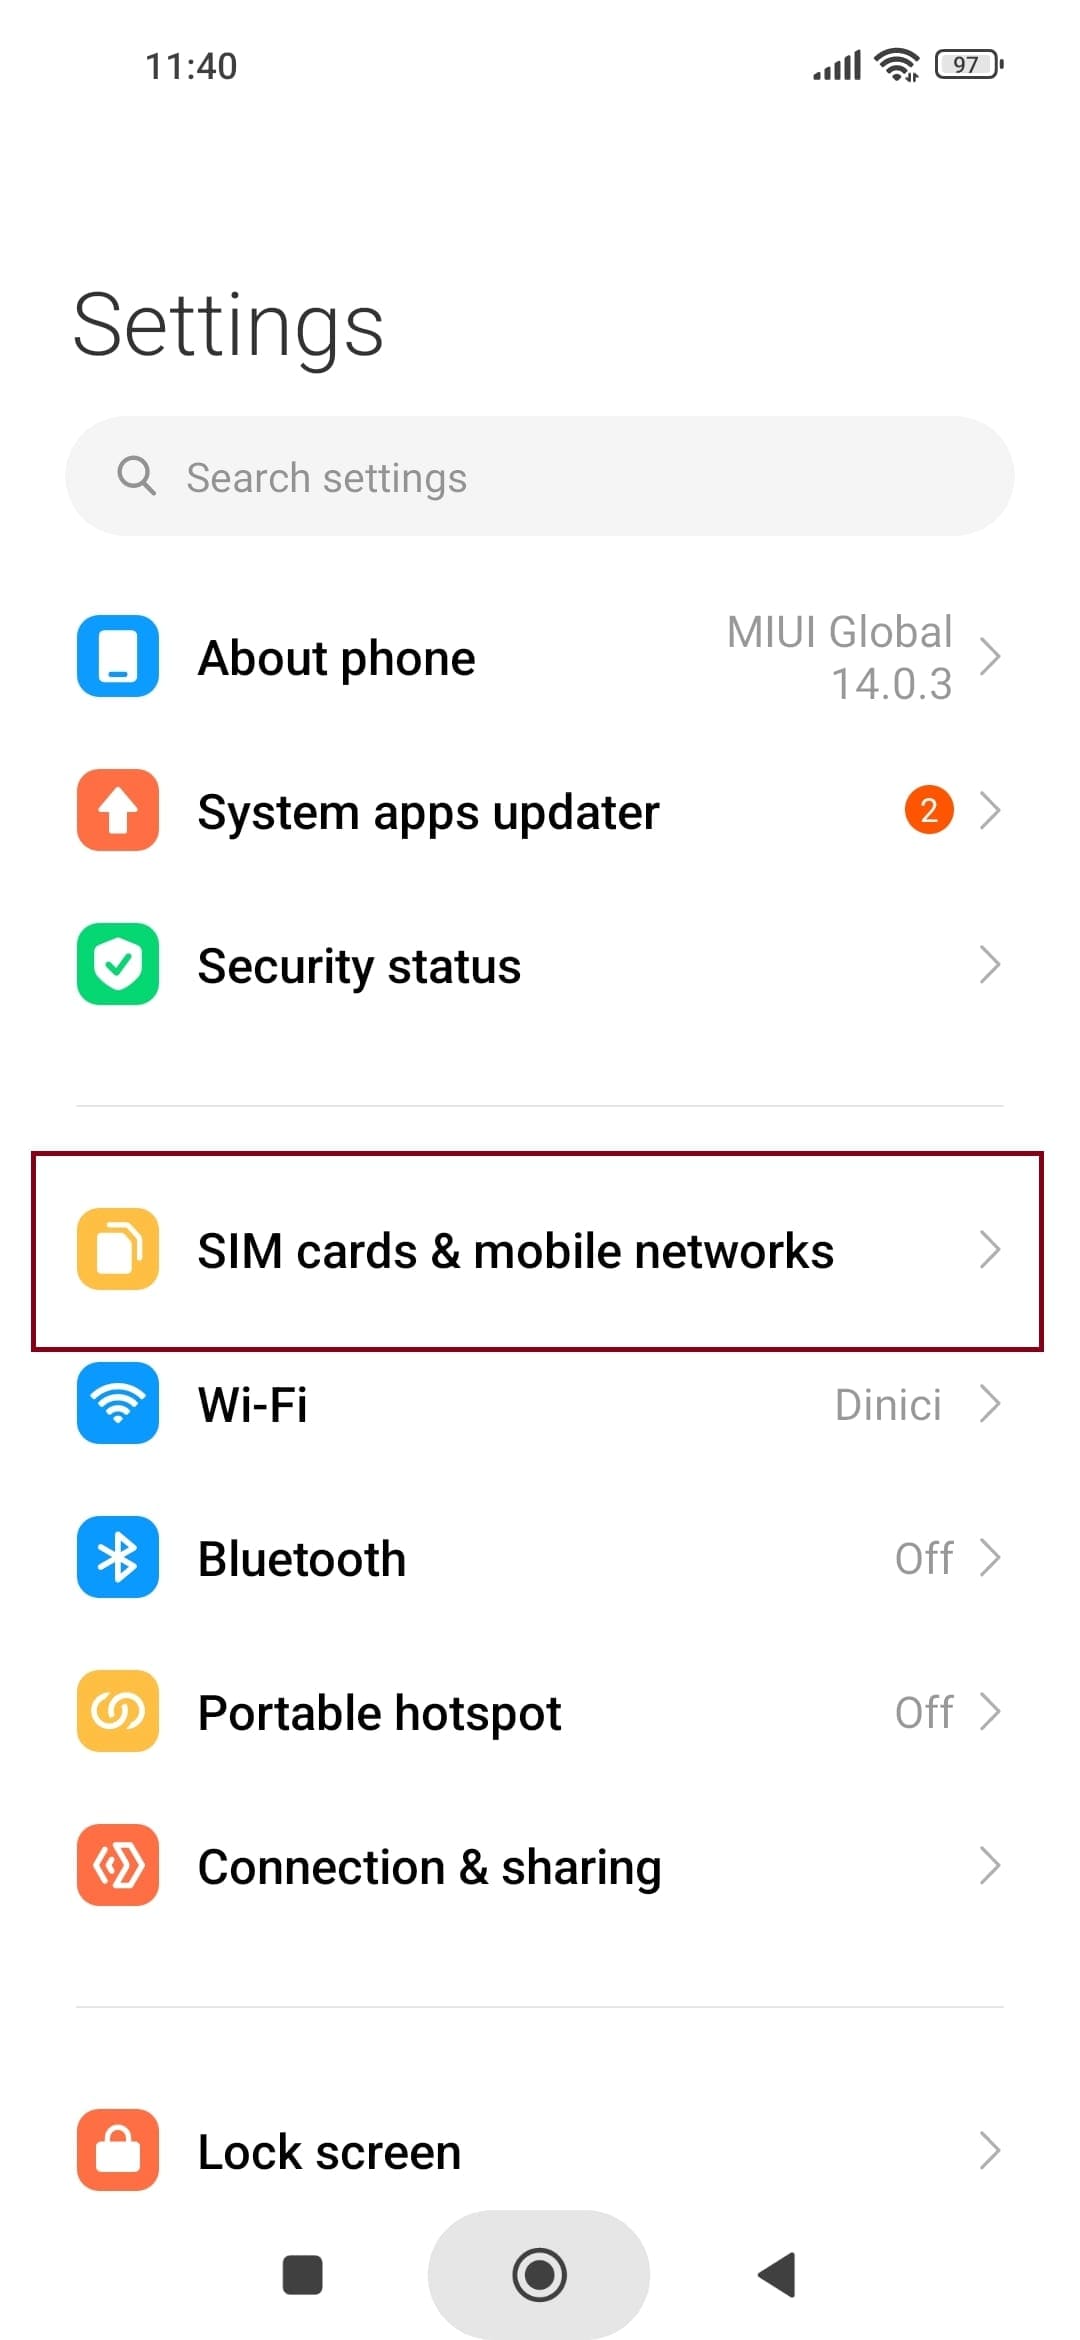 mobile networks settings on android